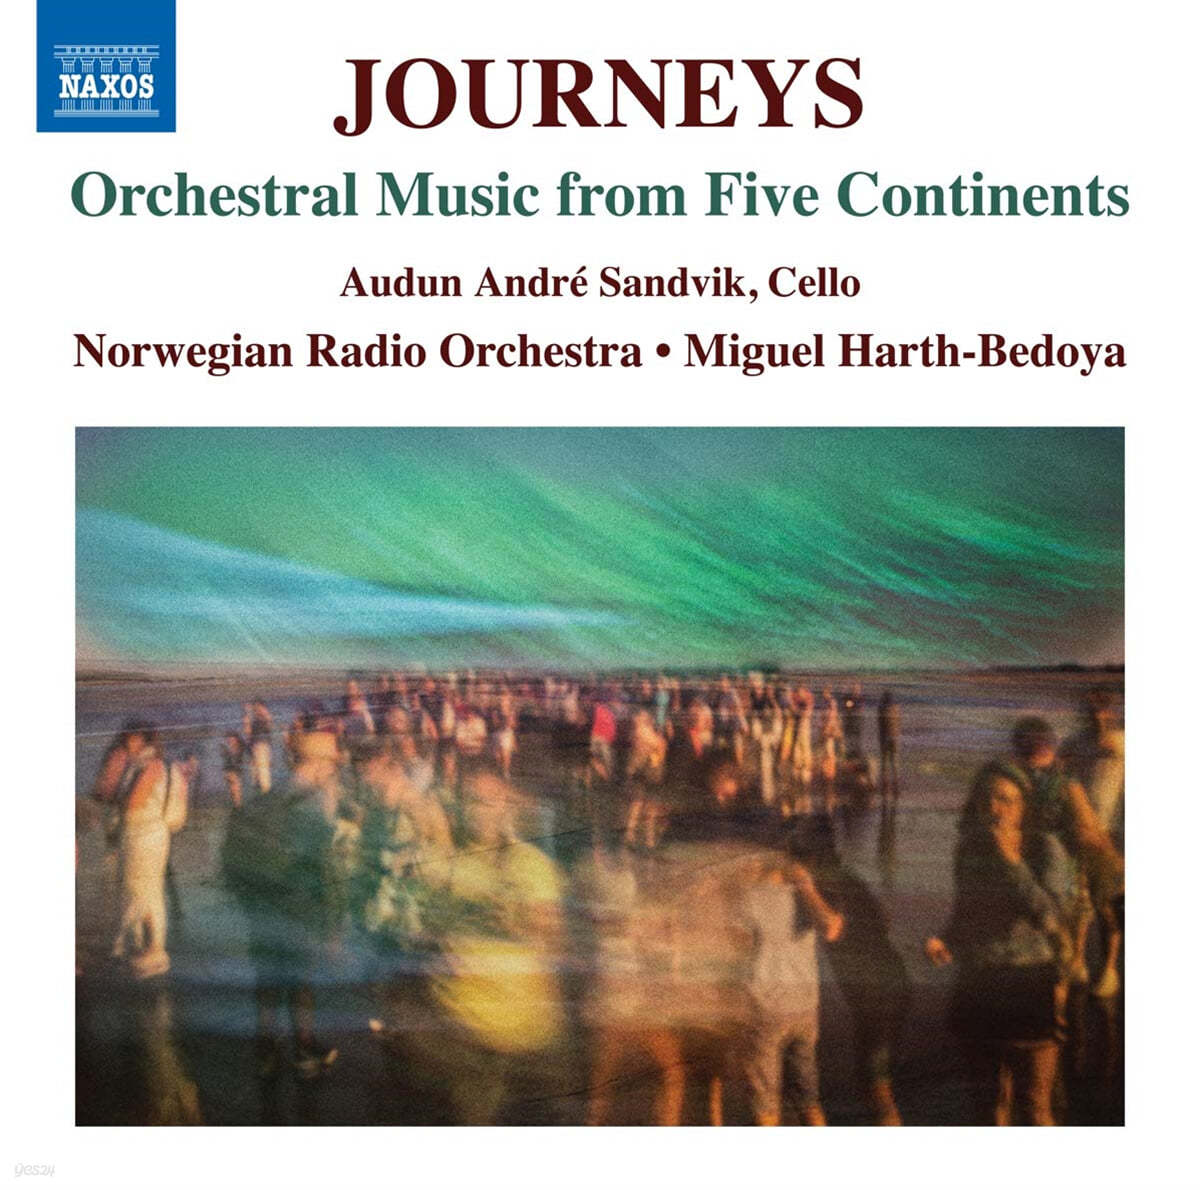 Miguel Harth-Bedoya 다섯 대륙의 관현악 음악 (Journeys - Orchestral Music from Five Continents) 